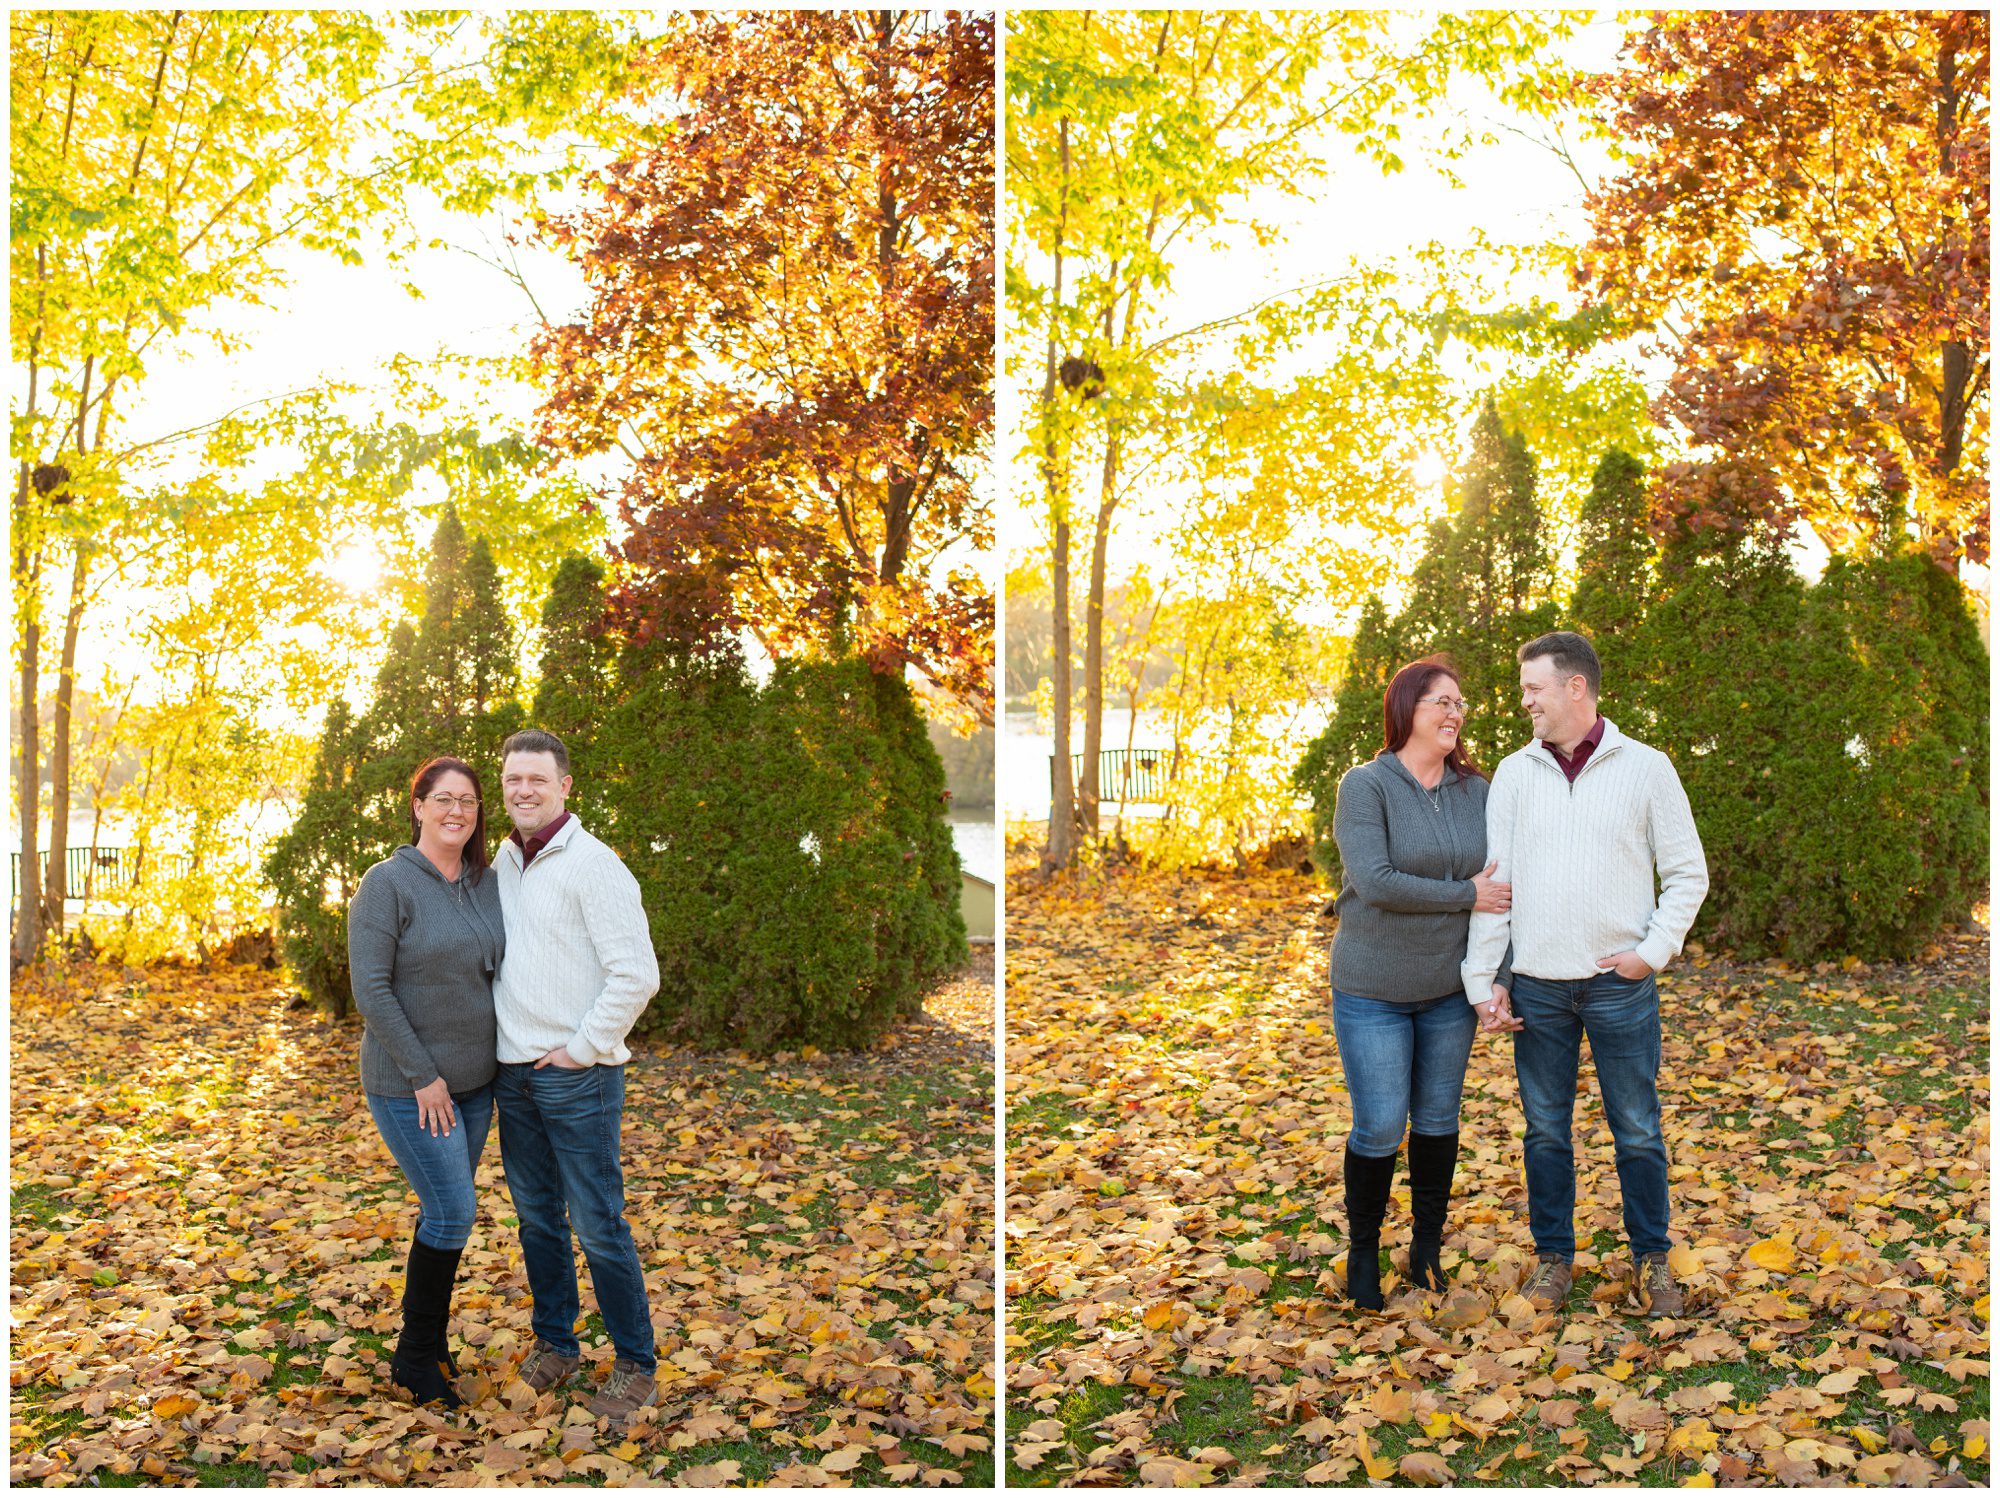 Stratford Engagement, Stratford Ontario Engagement Photography, Michelle A Photography